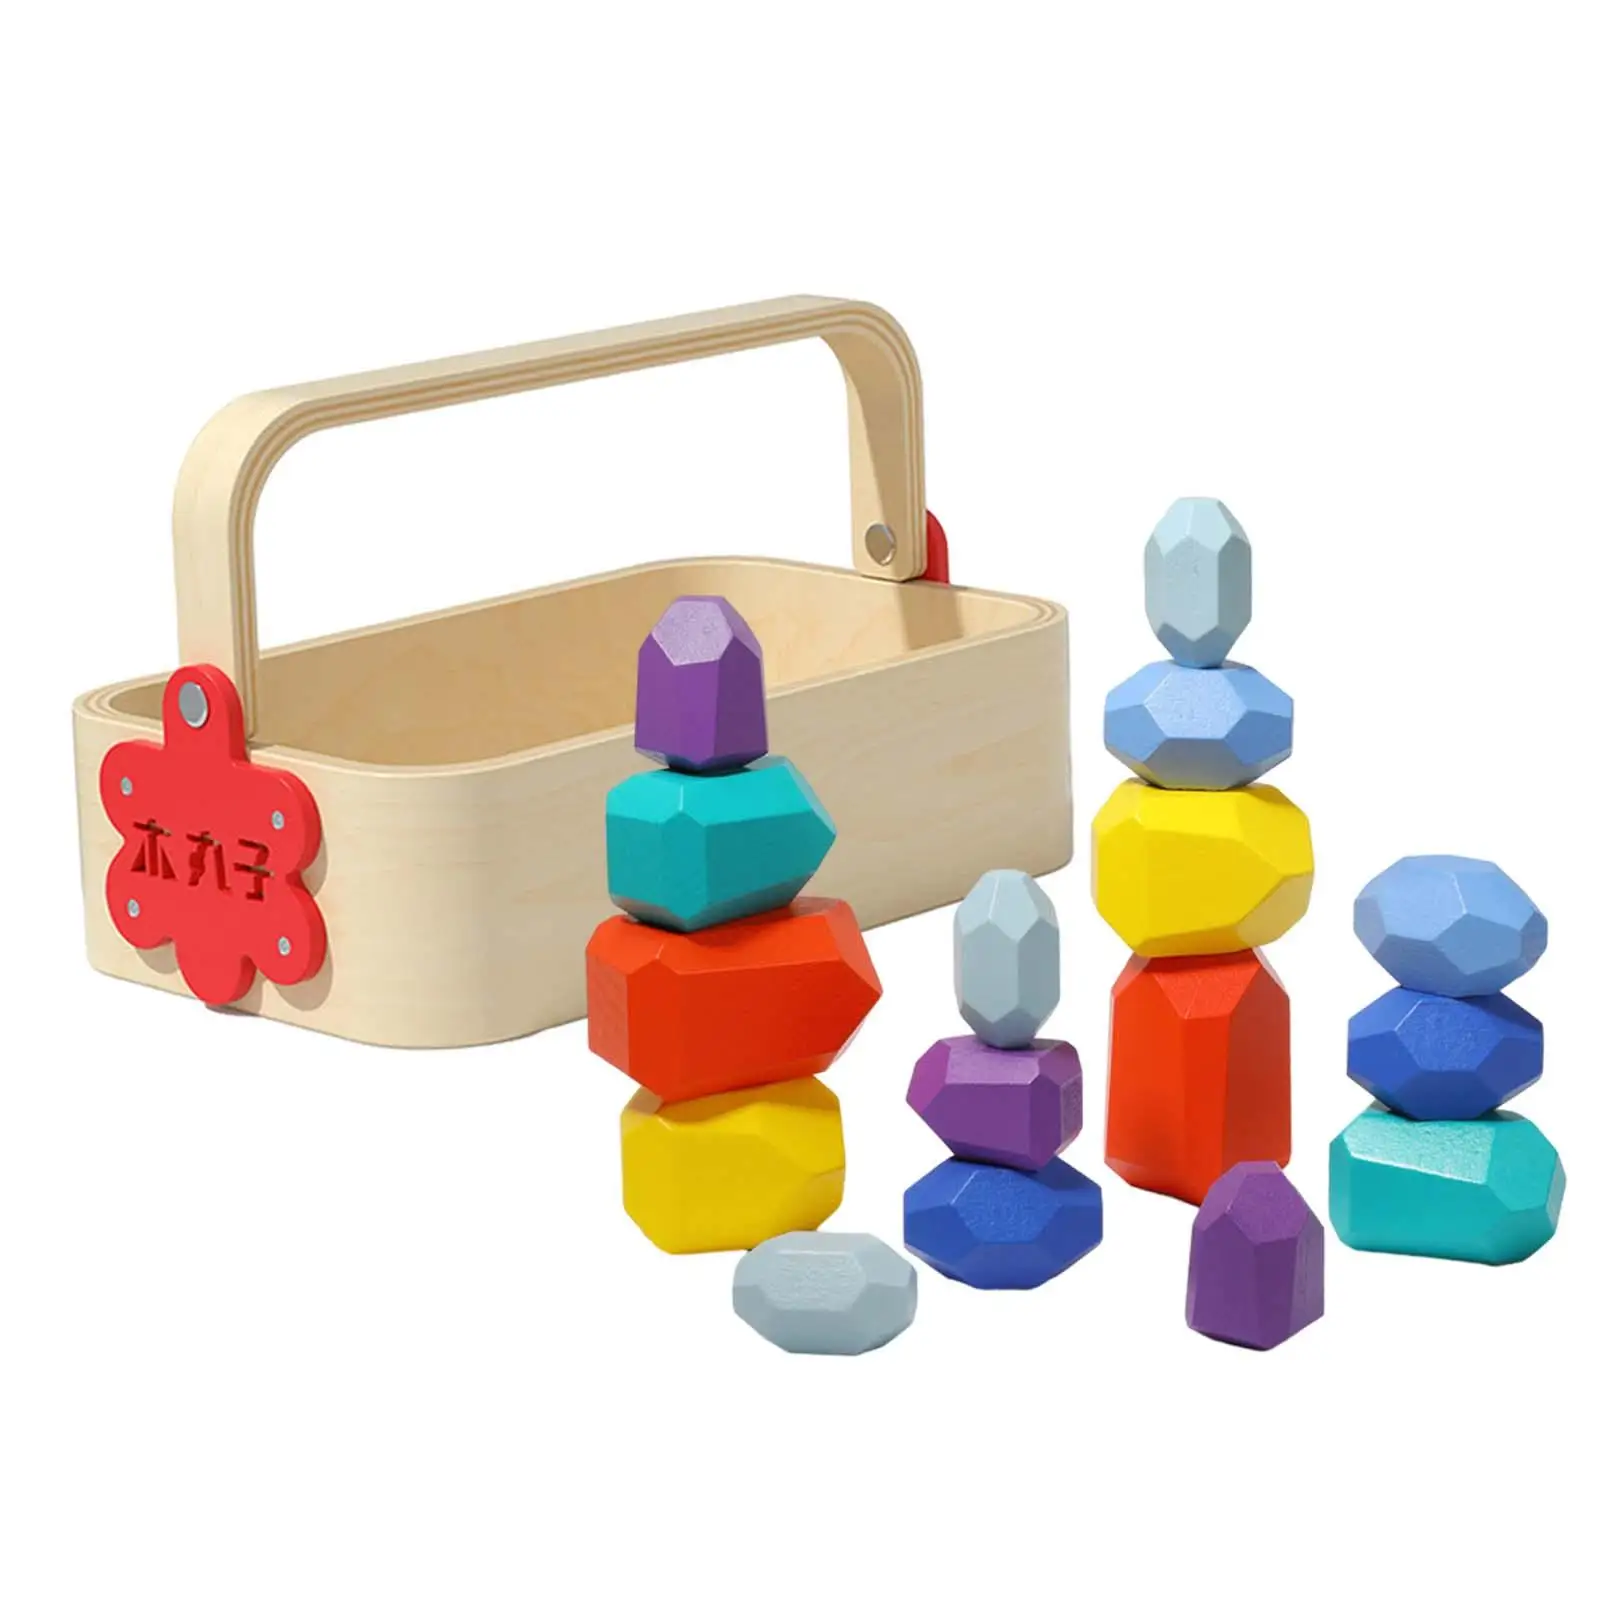 Stacking Blocks Promotes Creativity Puzzle Toys Montessori Toys Balance Stones for Children Girls Kid 3 Years up Holiday Gifts